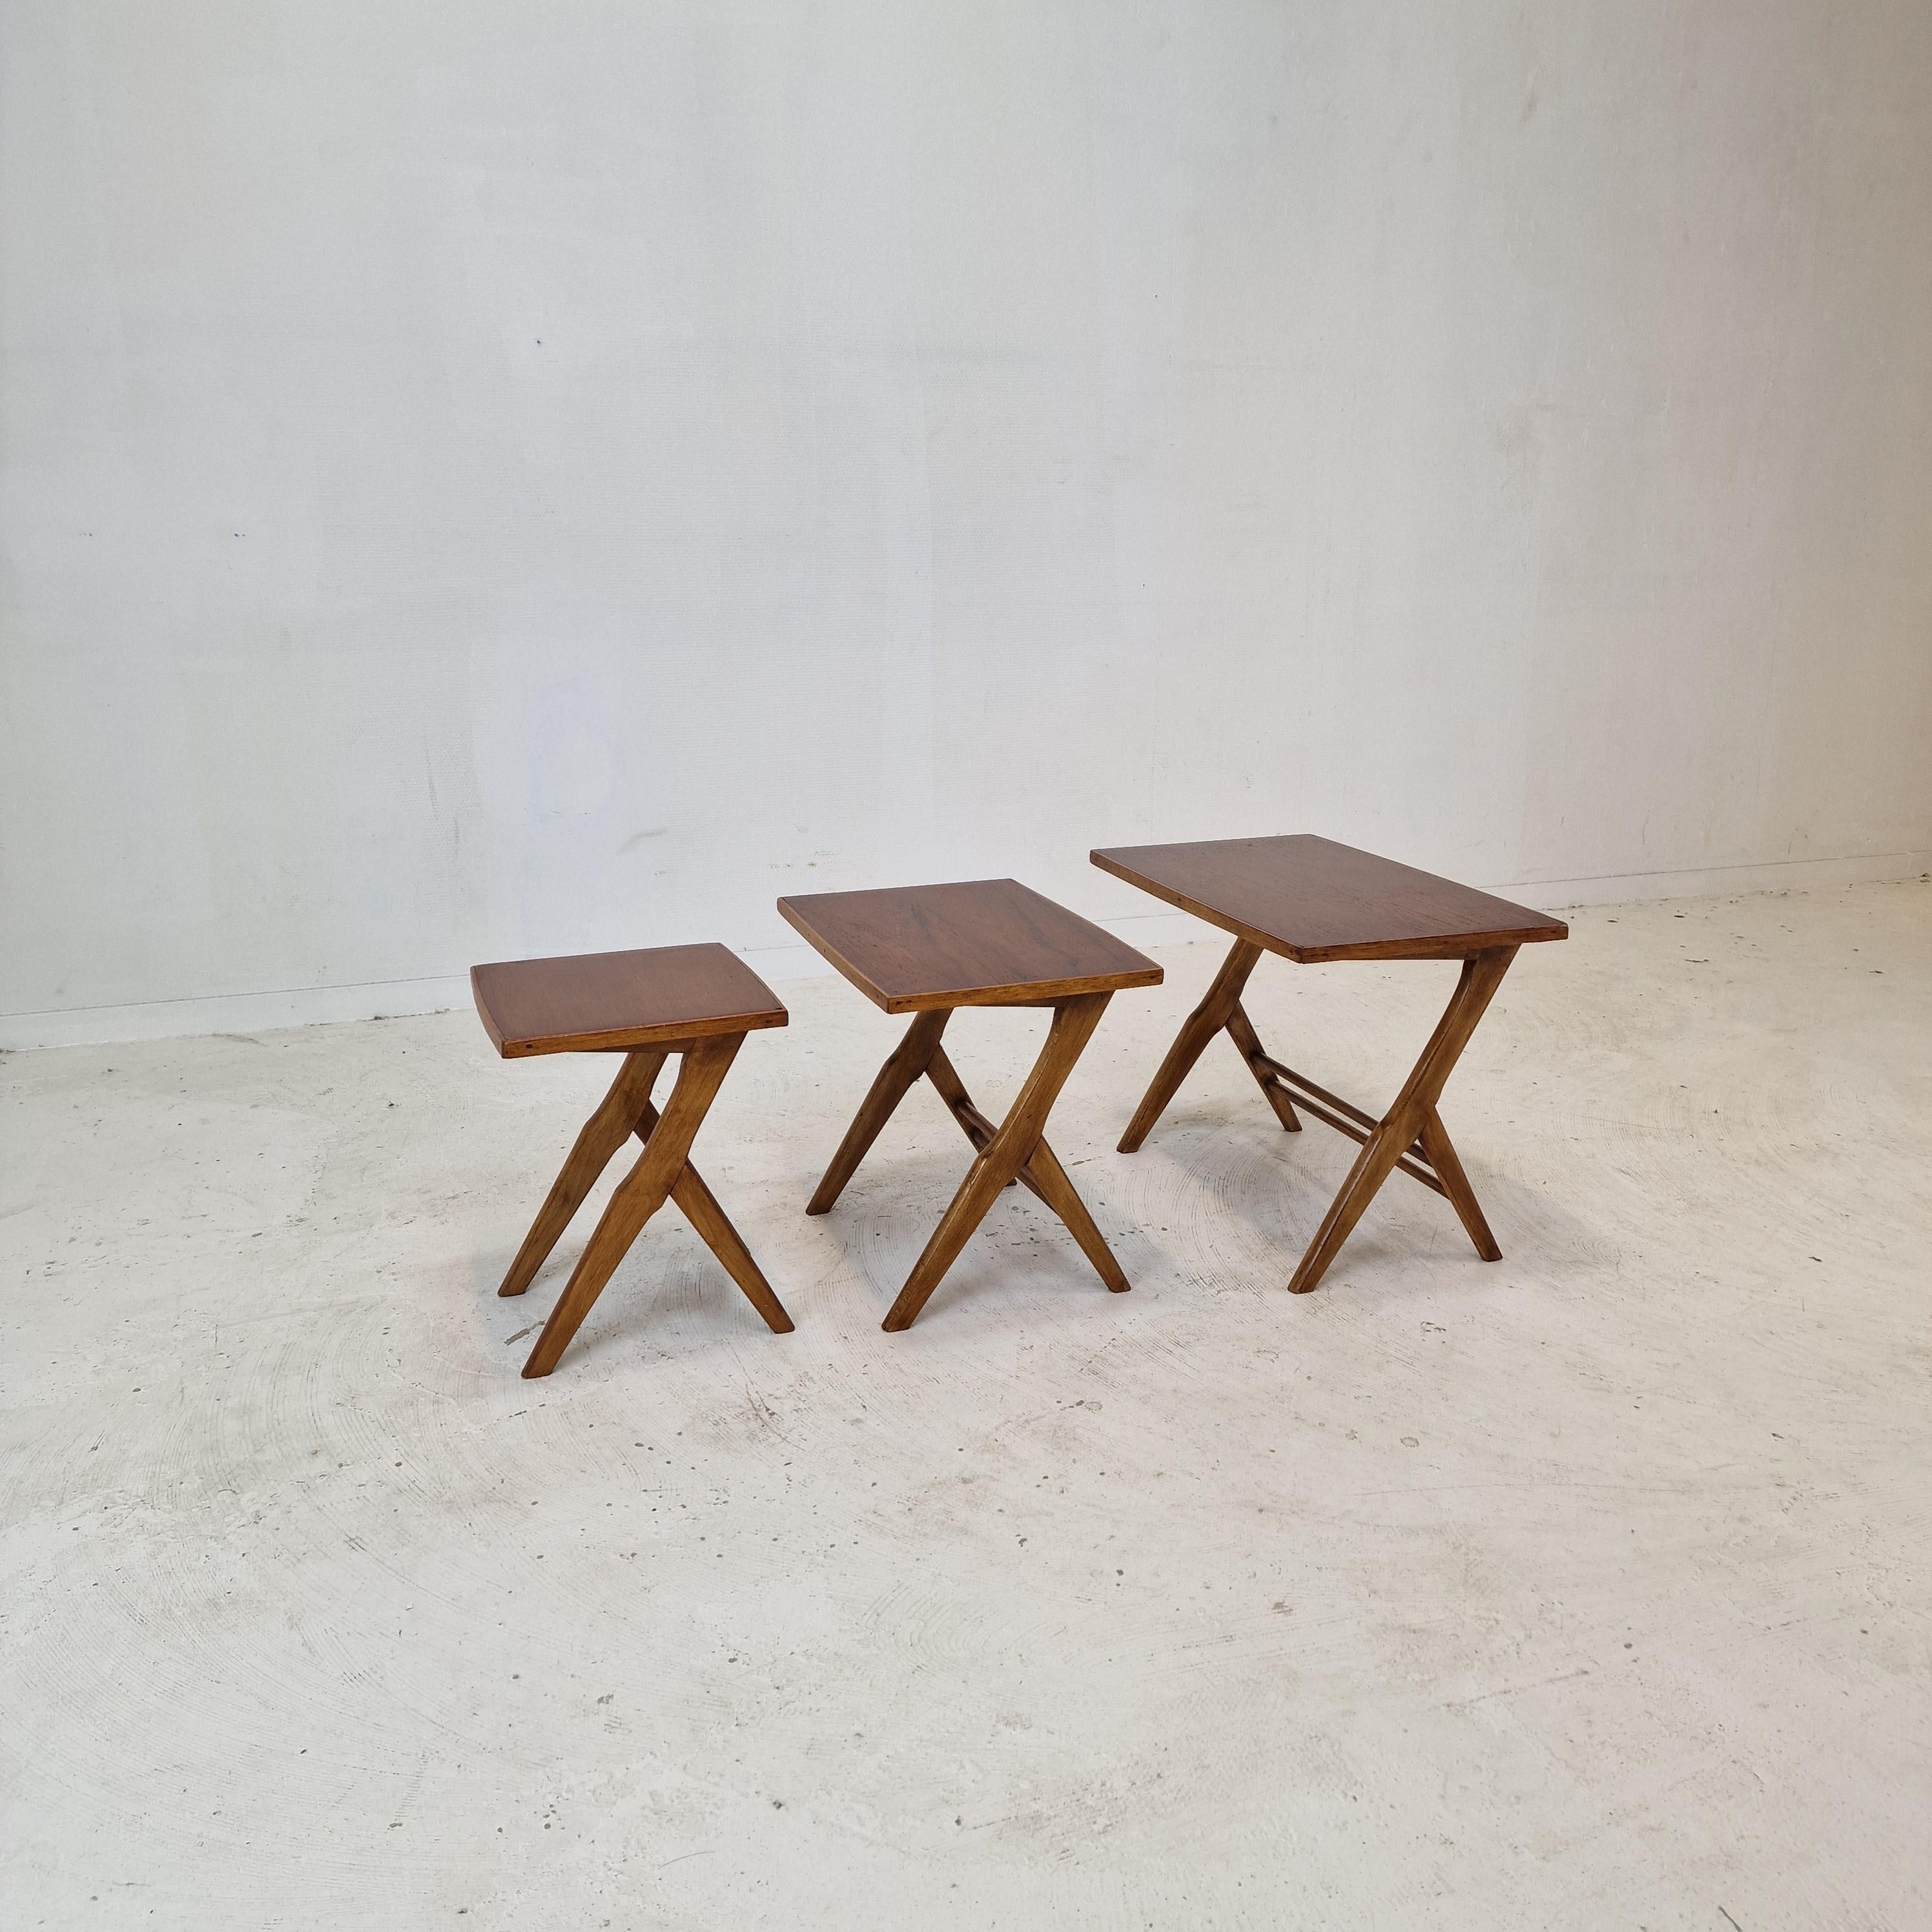 Hand-Crafted Set of 3 Wooden Nesting Tables, Holland 1960s For Sale